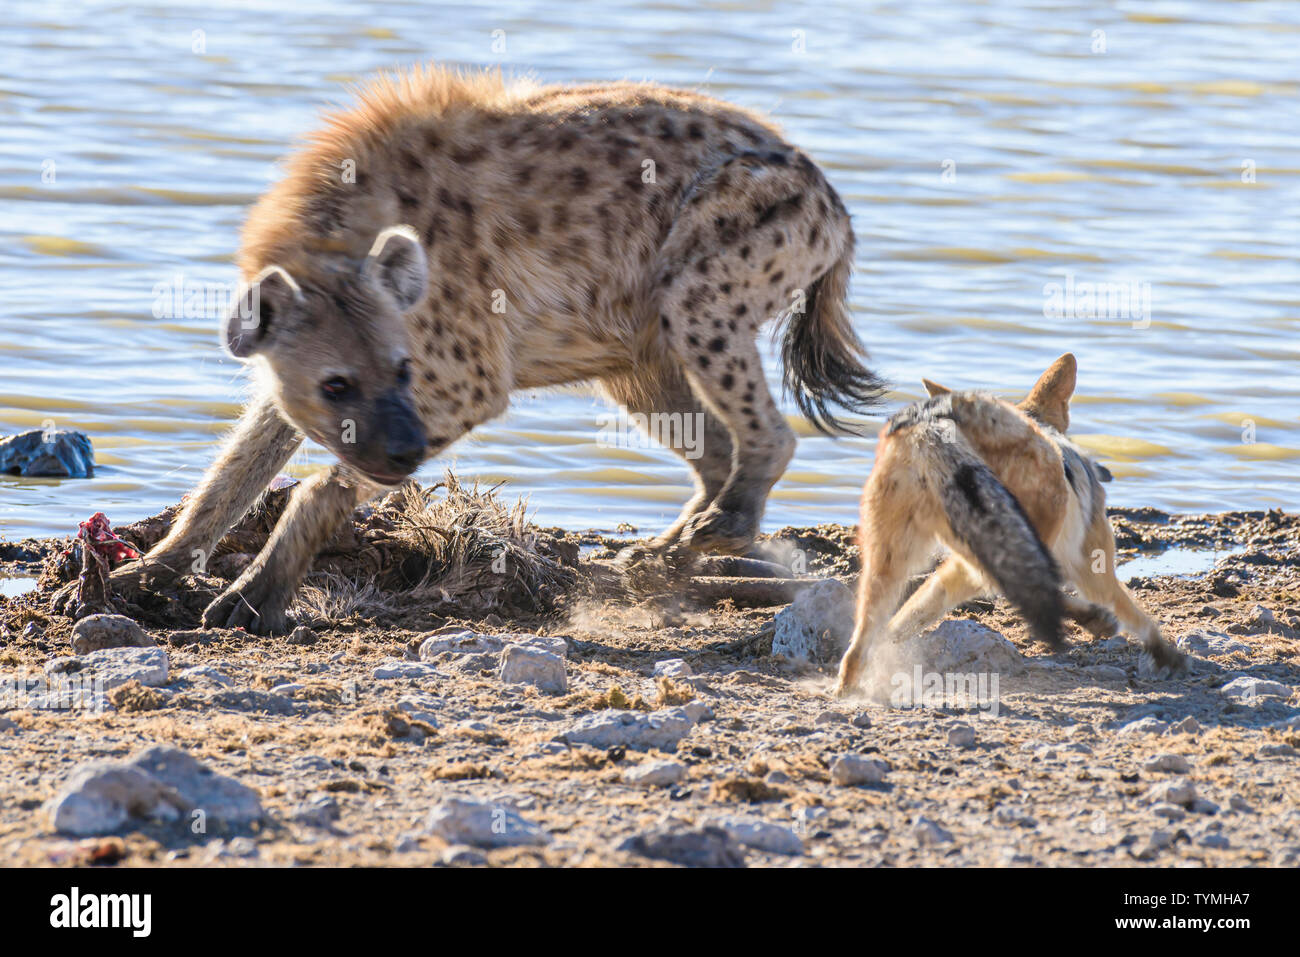 Black backed jackals harass and attempt to confuse a spotted hyena, allowing them to steal part of their kill at Etosha National Park, Namibia Stock Photo